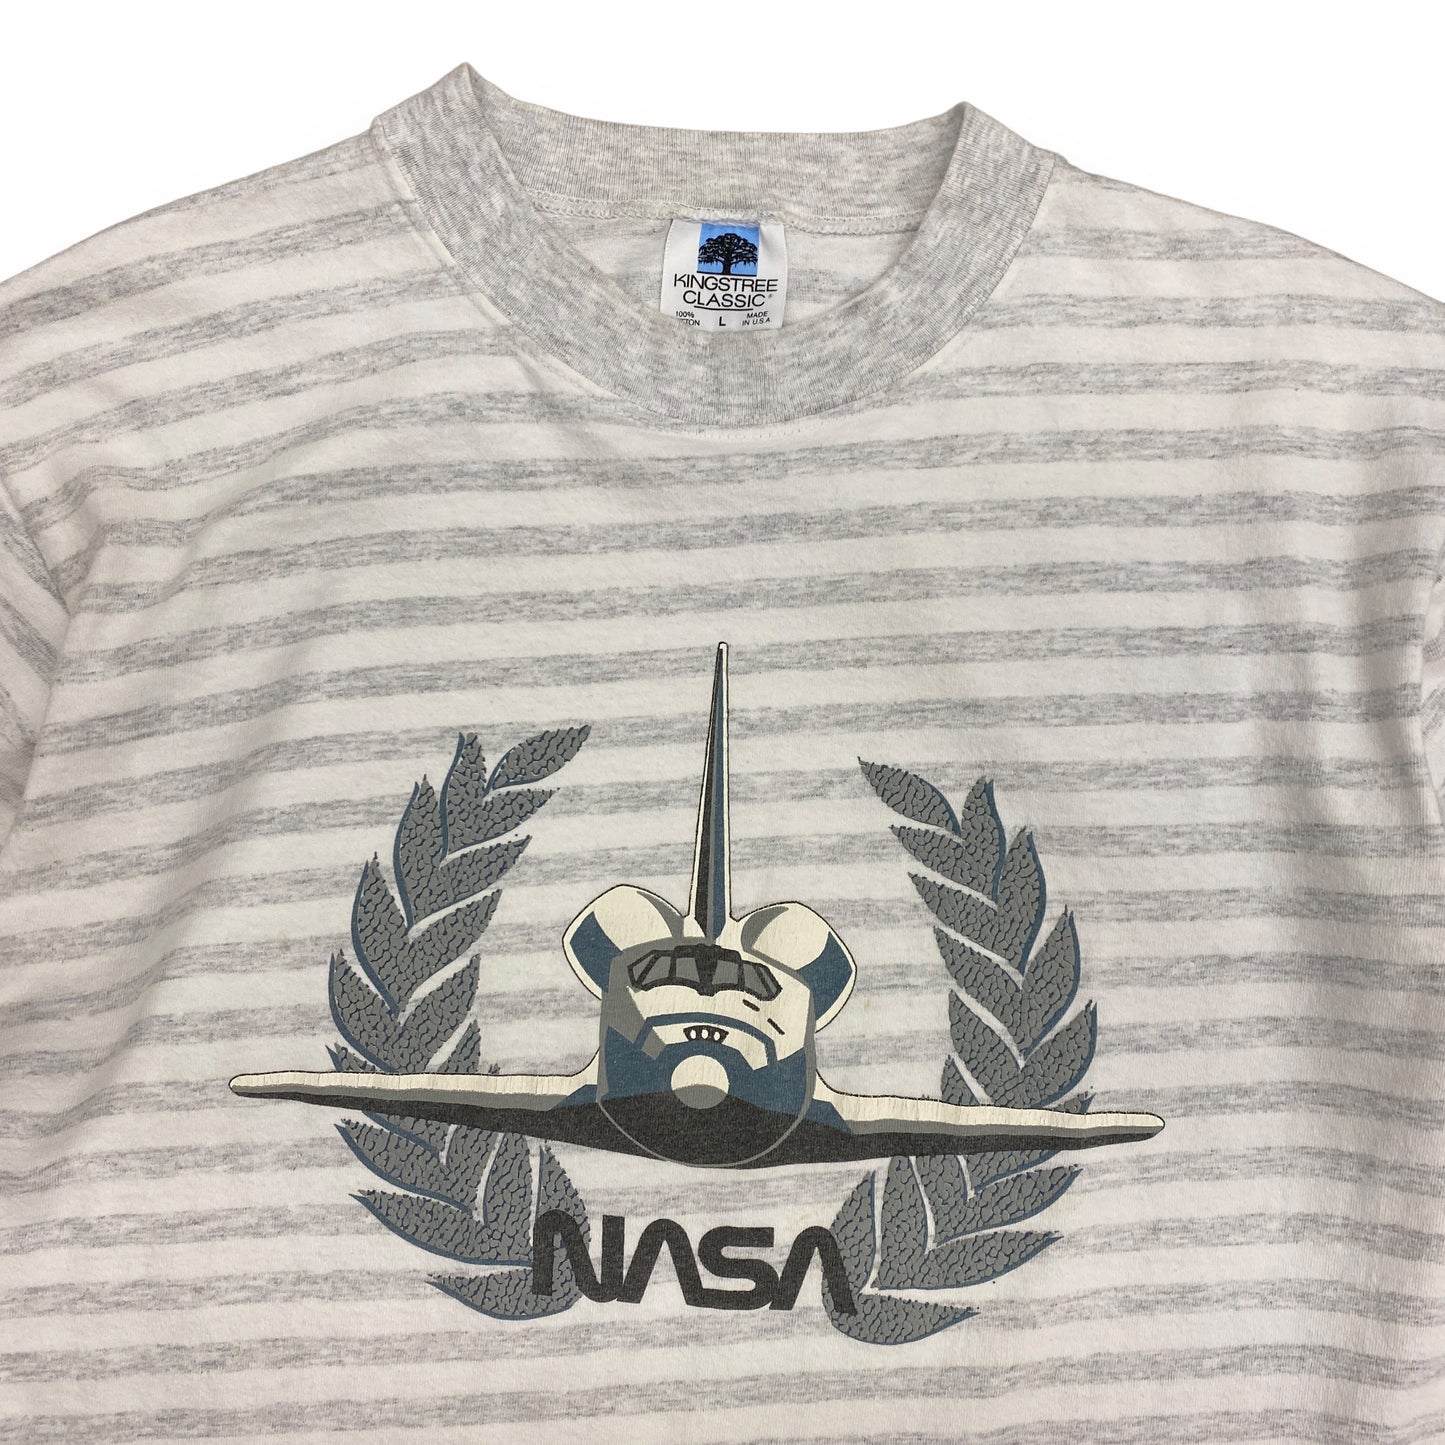 1990s Vintage NASA Space Shuttle Tee - Size Large